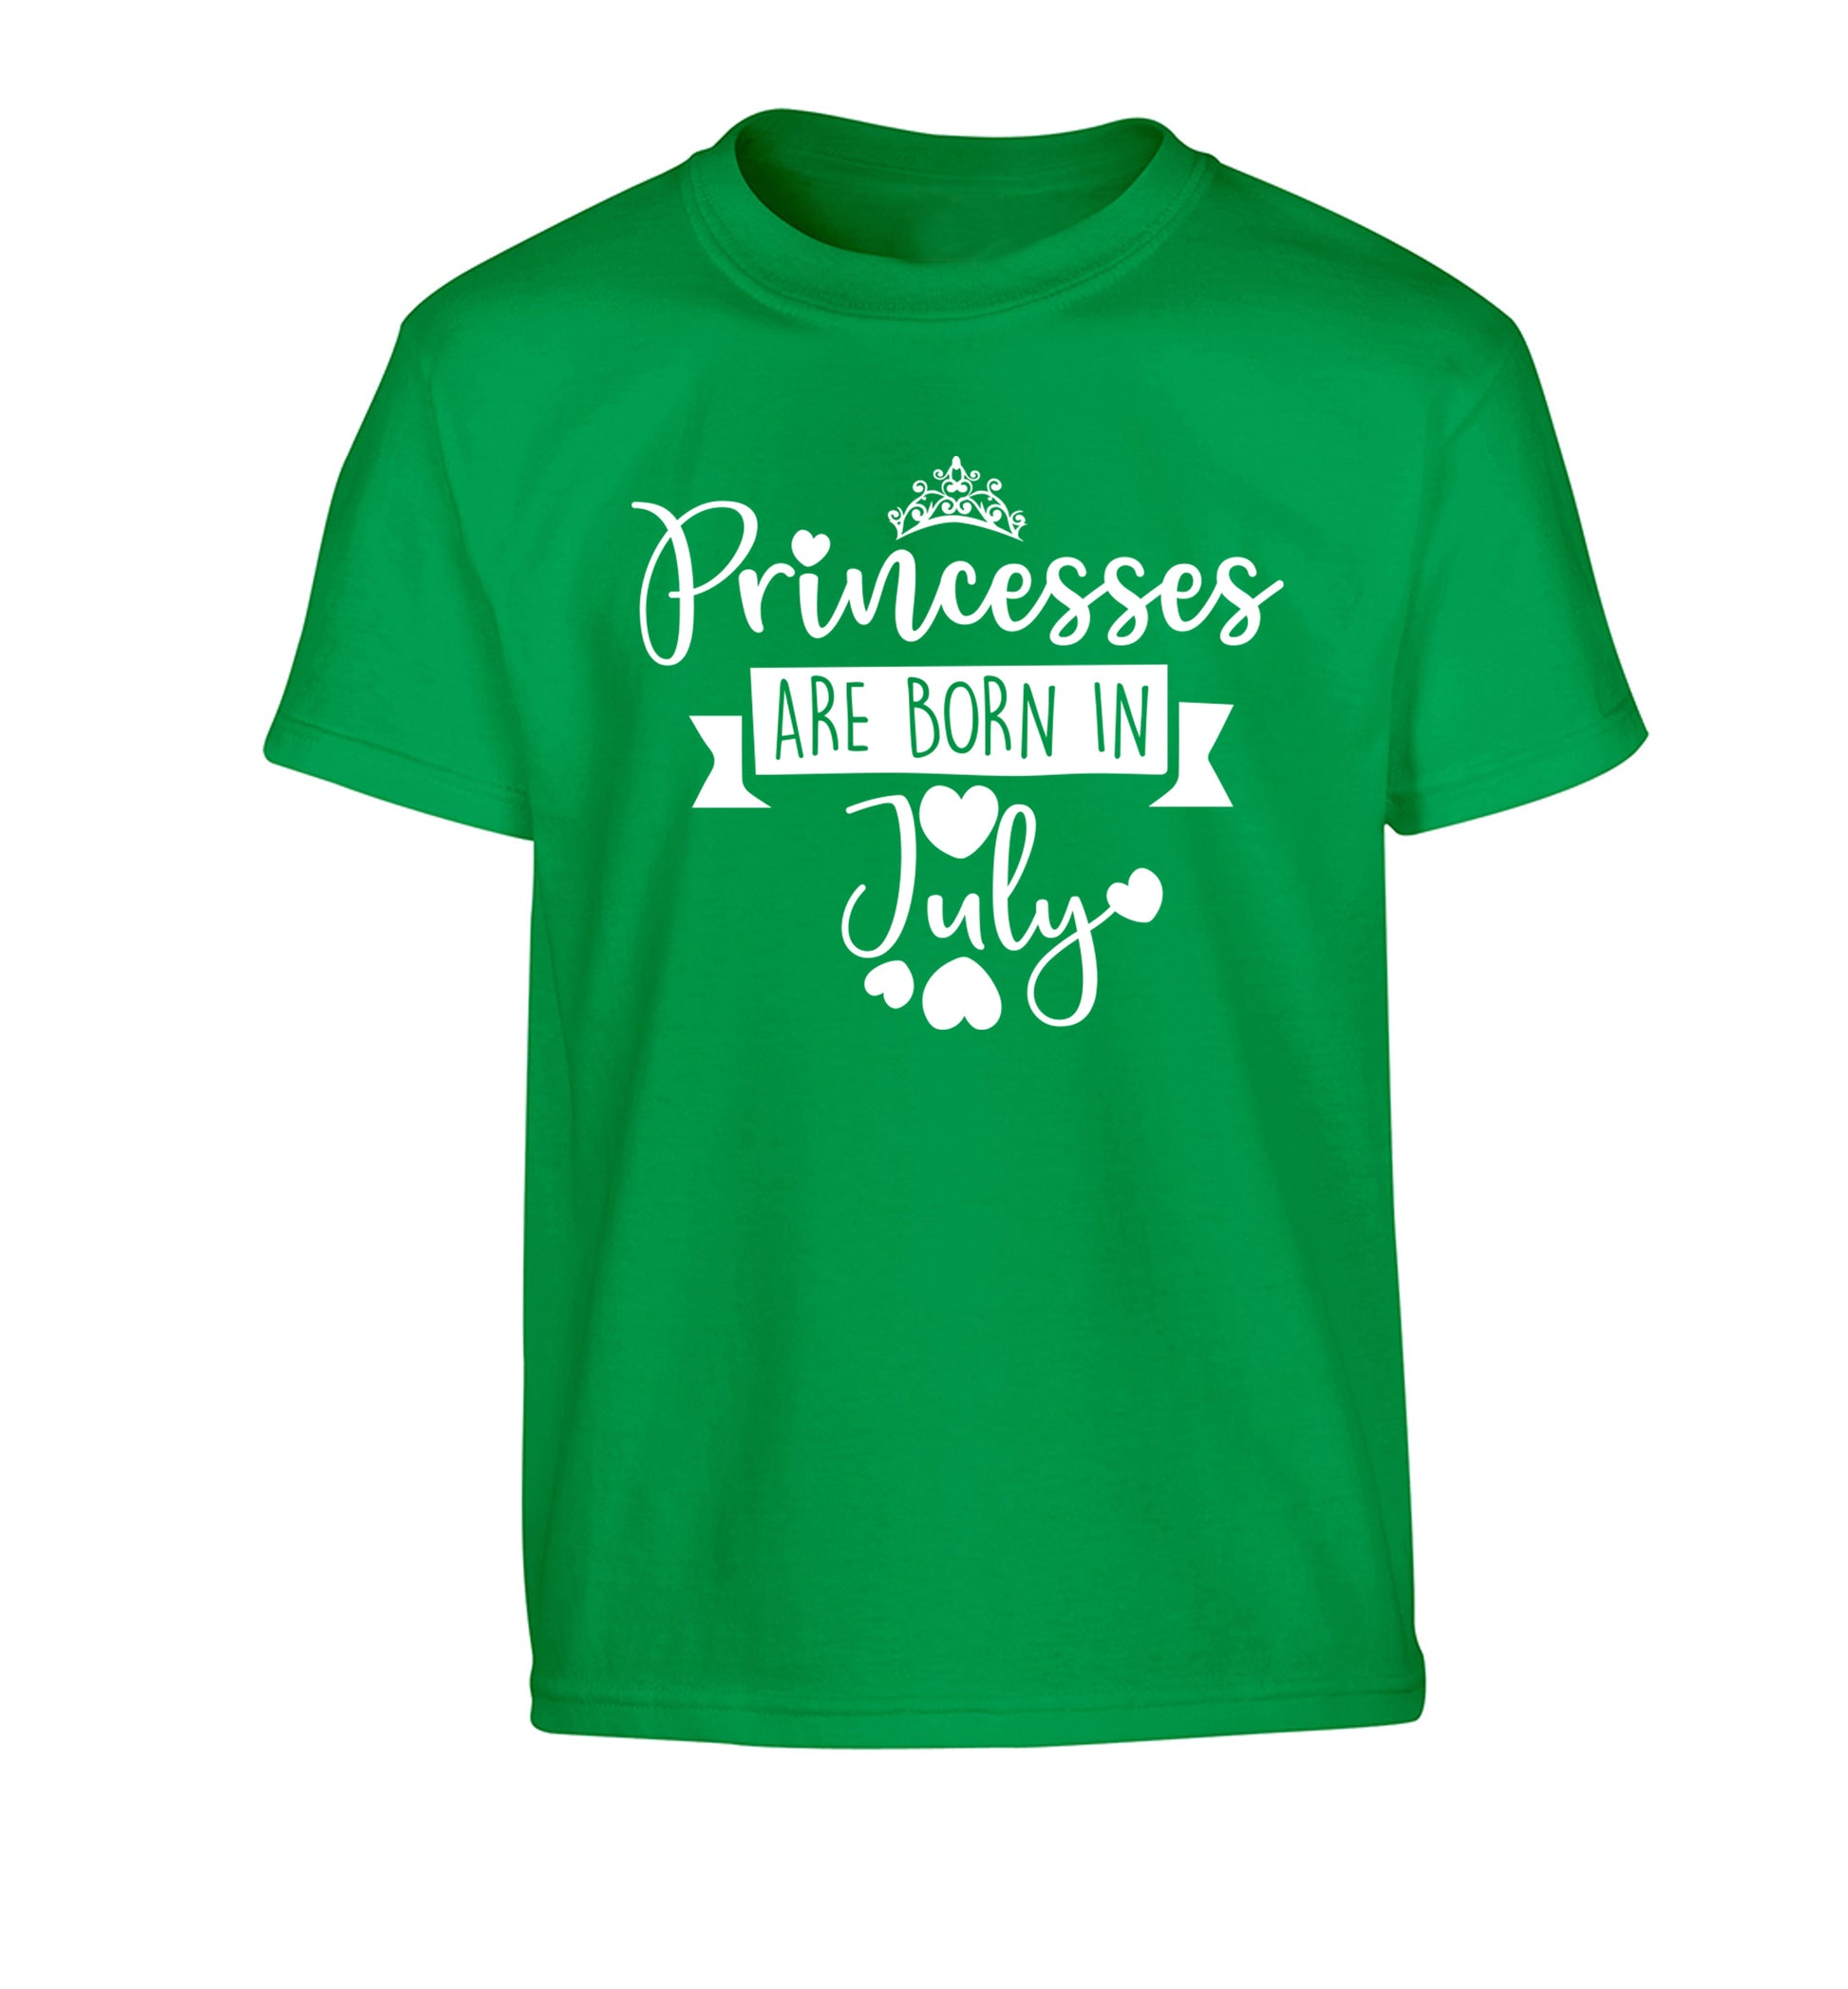 Princesses are born in July Children's green Tshirt 12-13 Years